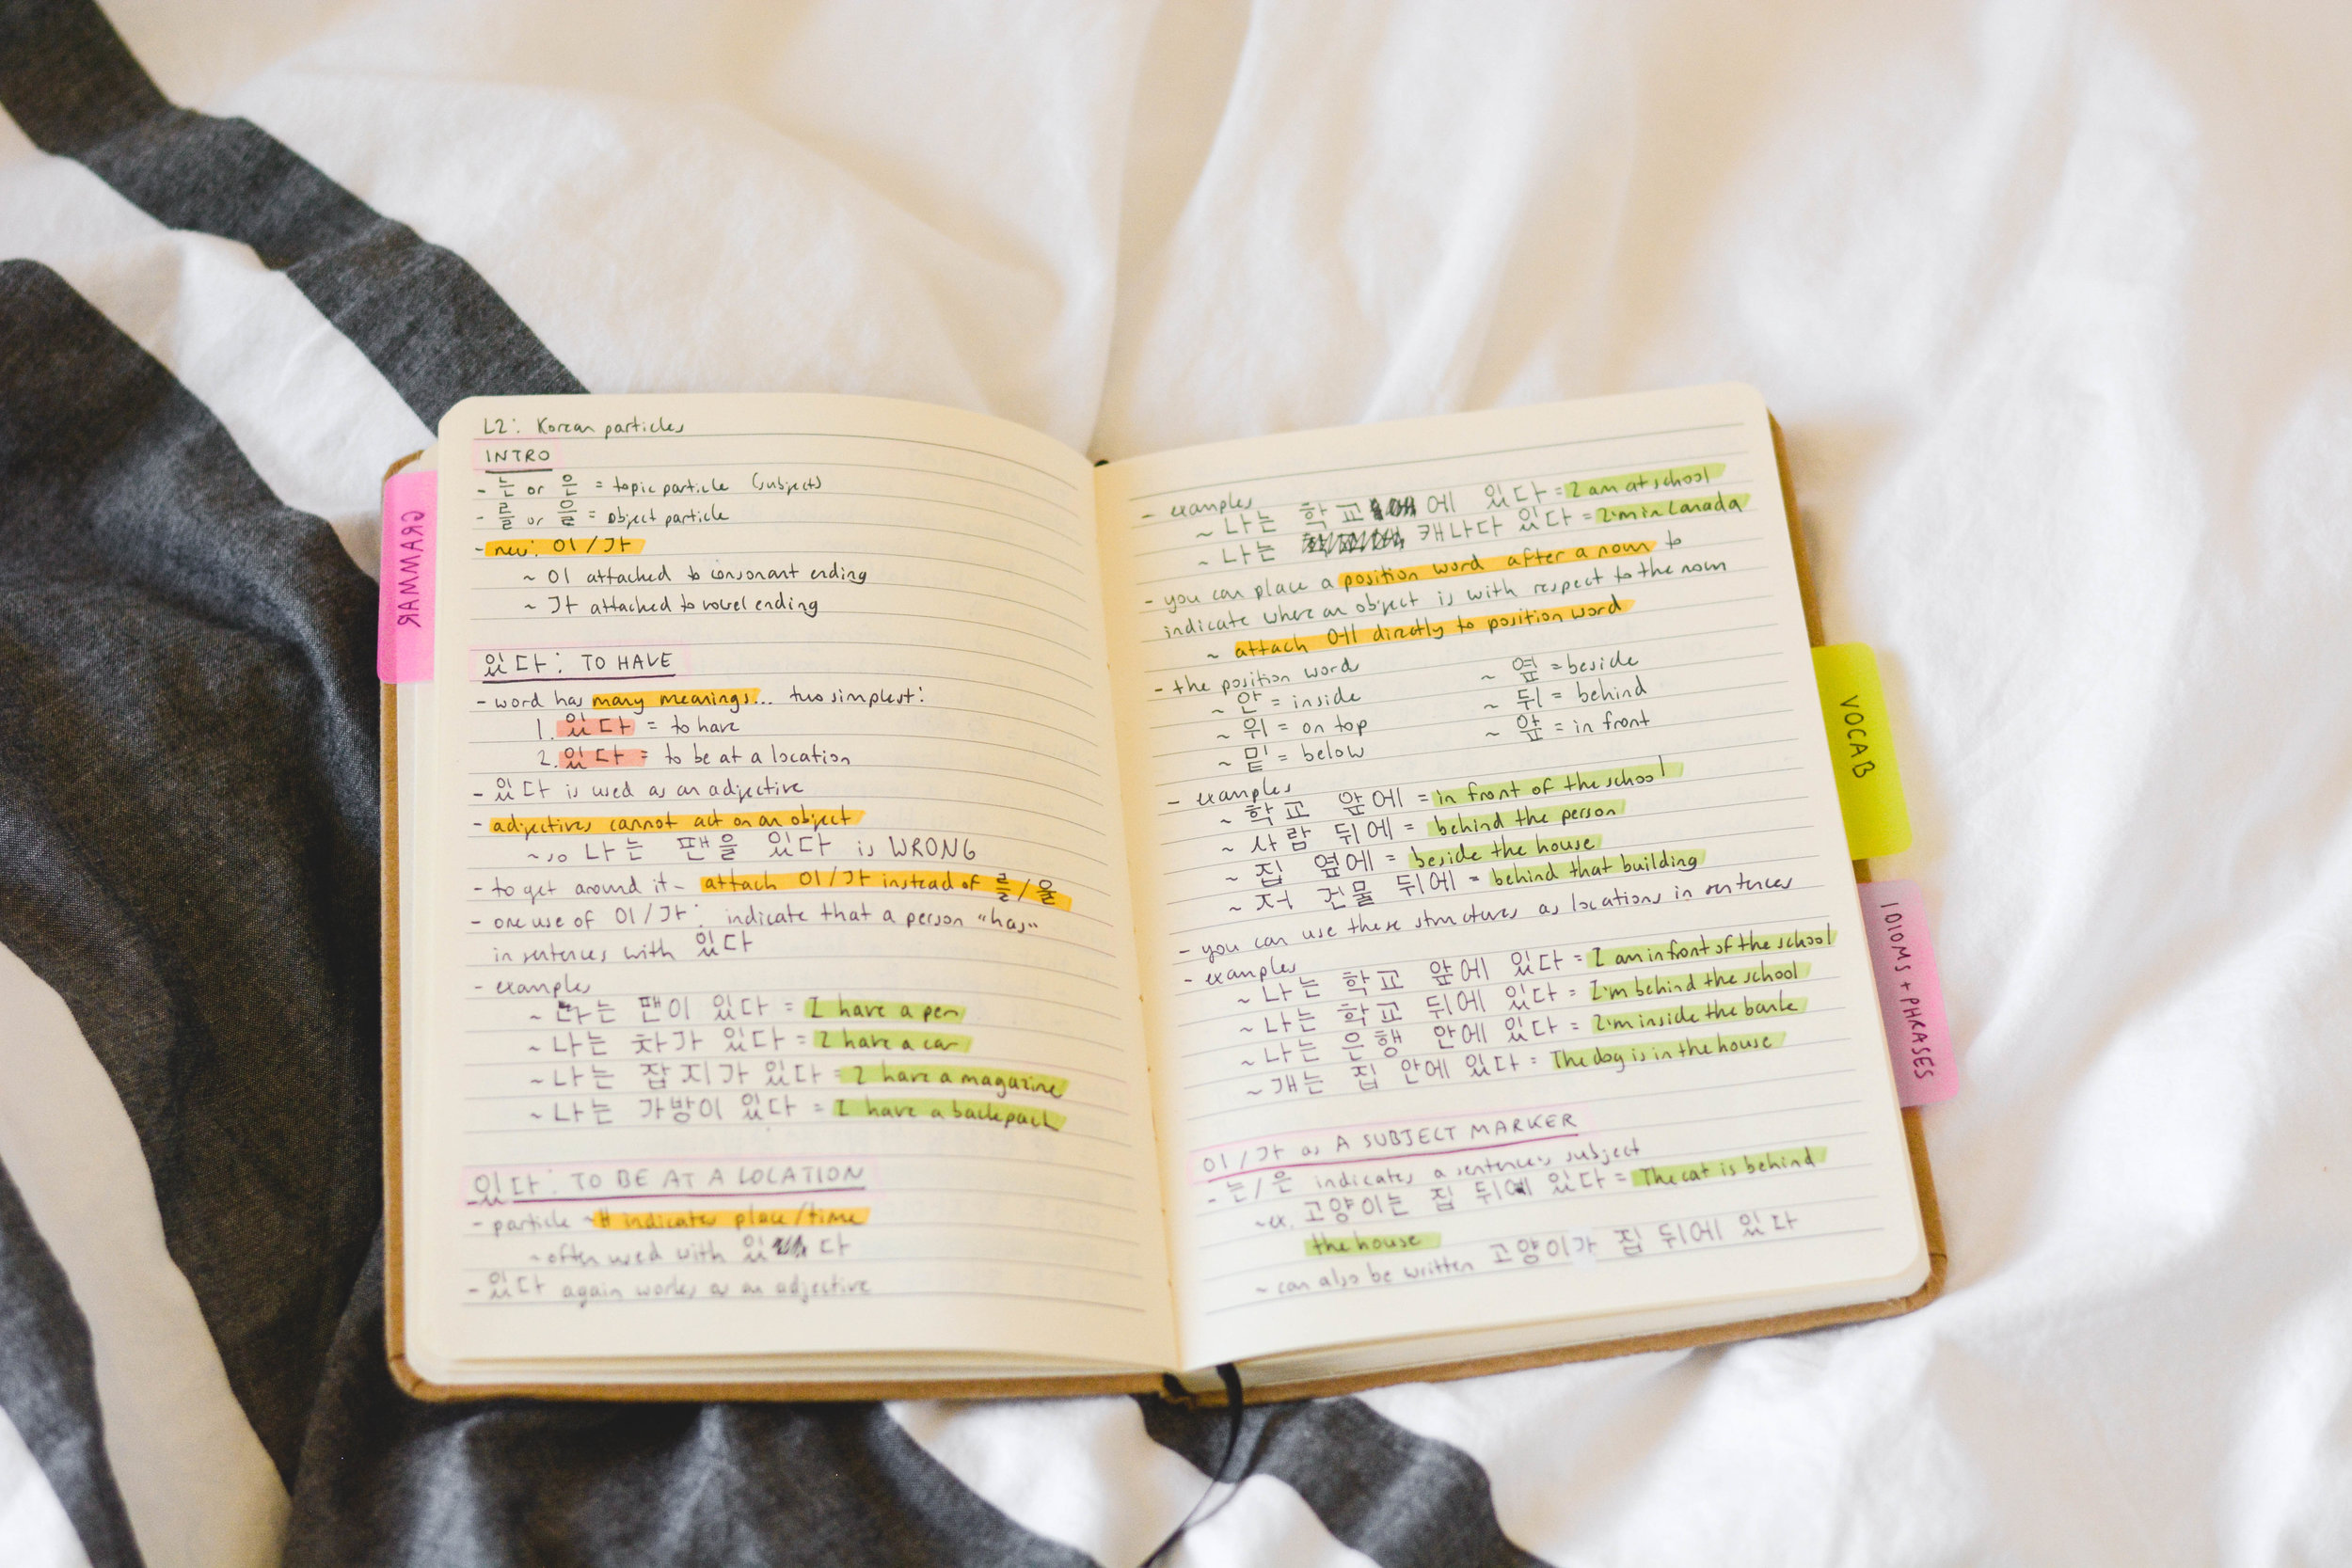 15 Creative Uses For Your Empty Notebooks — The Bliss Bean